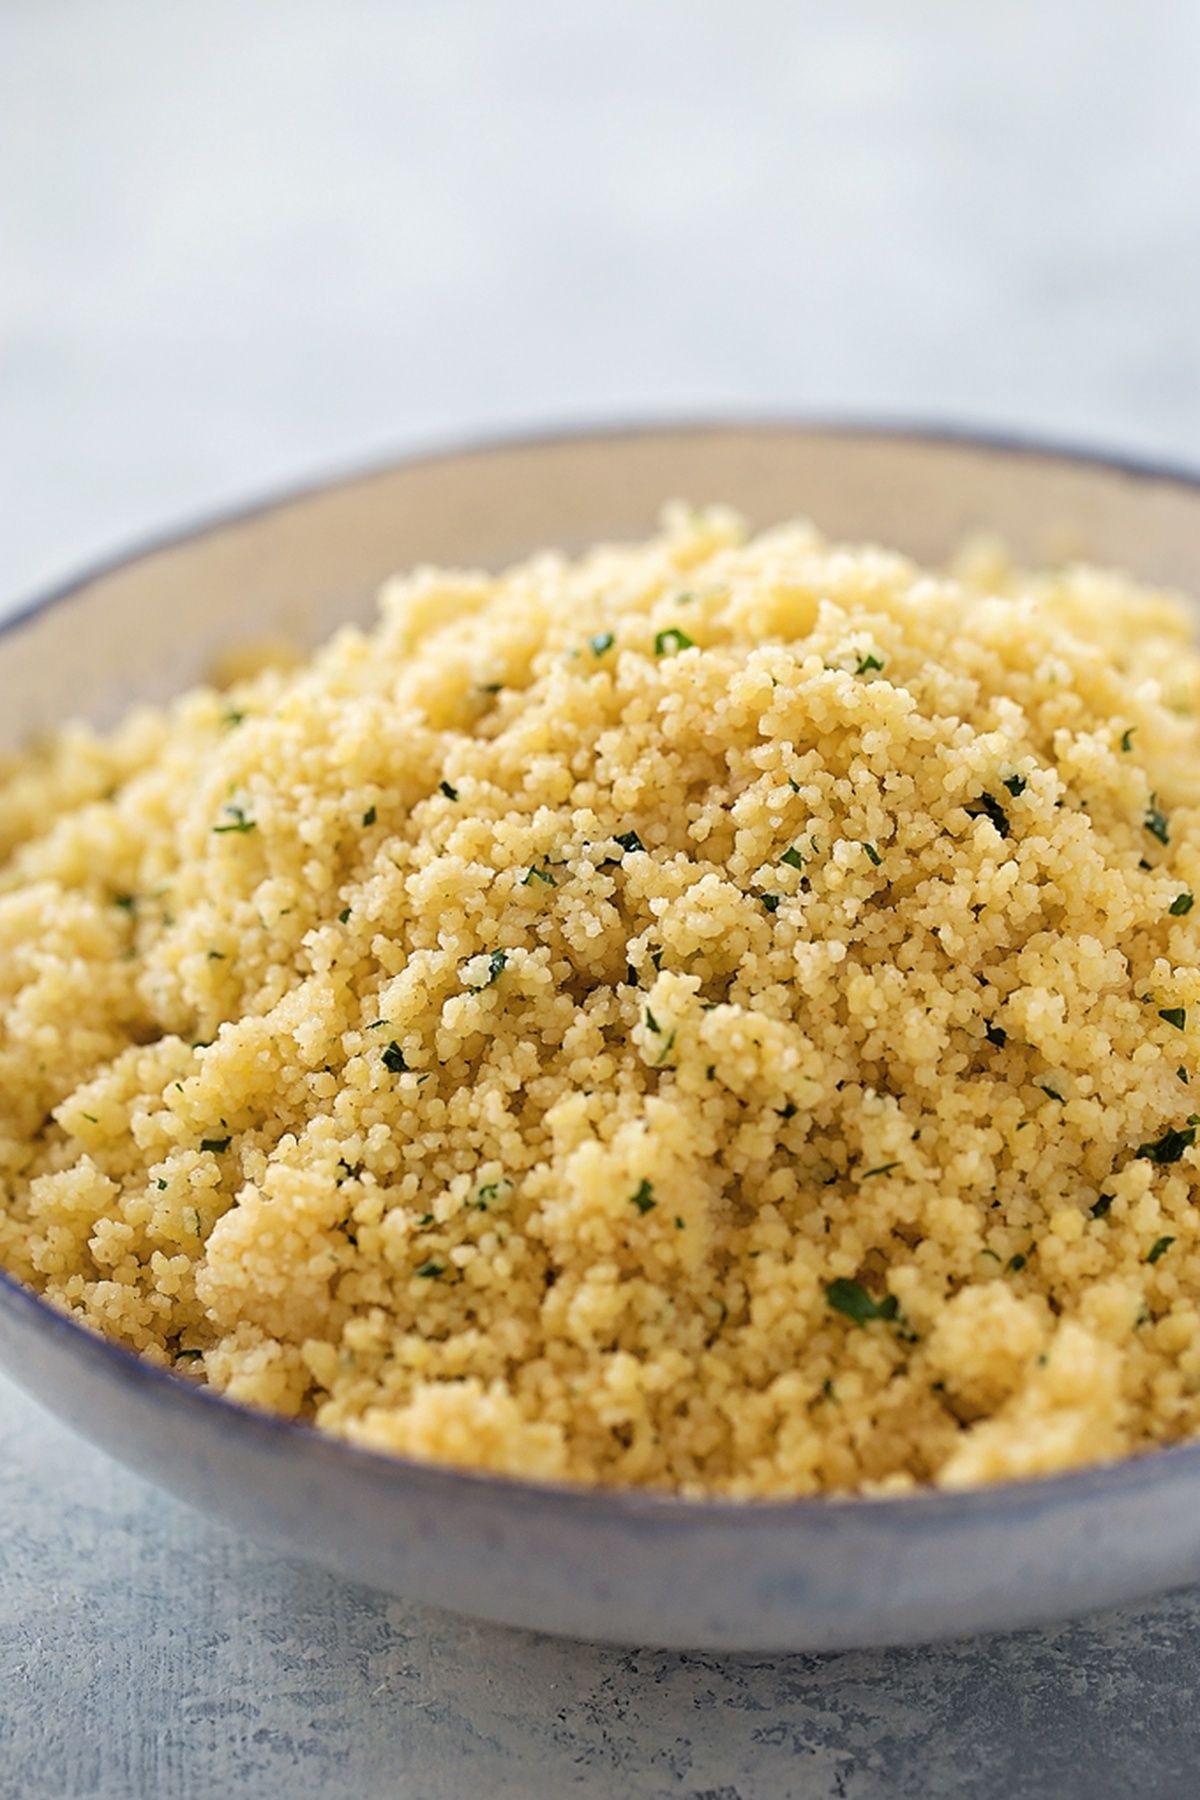 POPULAR: More and more people are appreciating the benefits of couscous